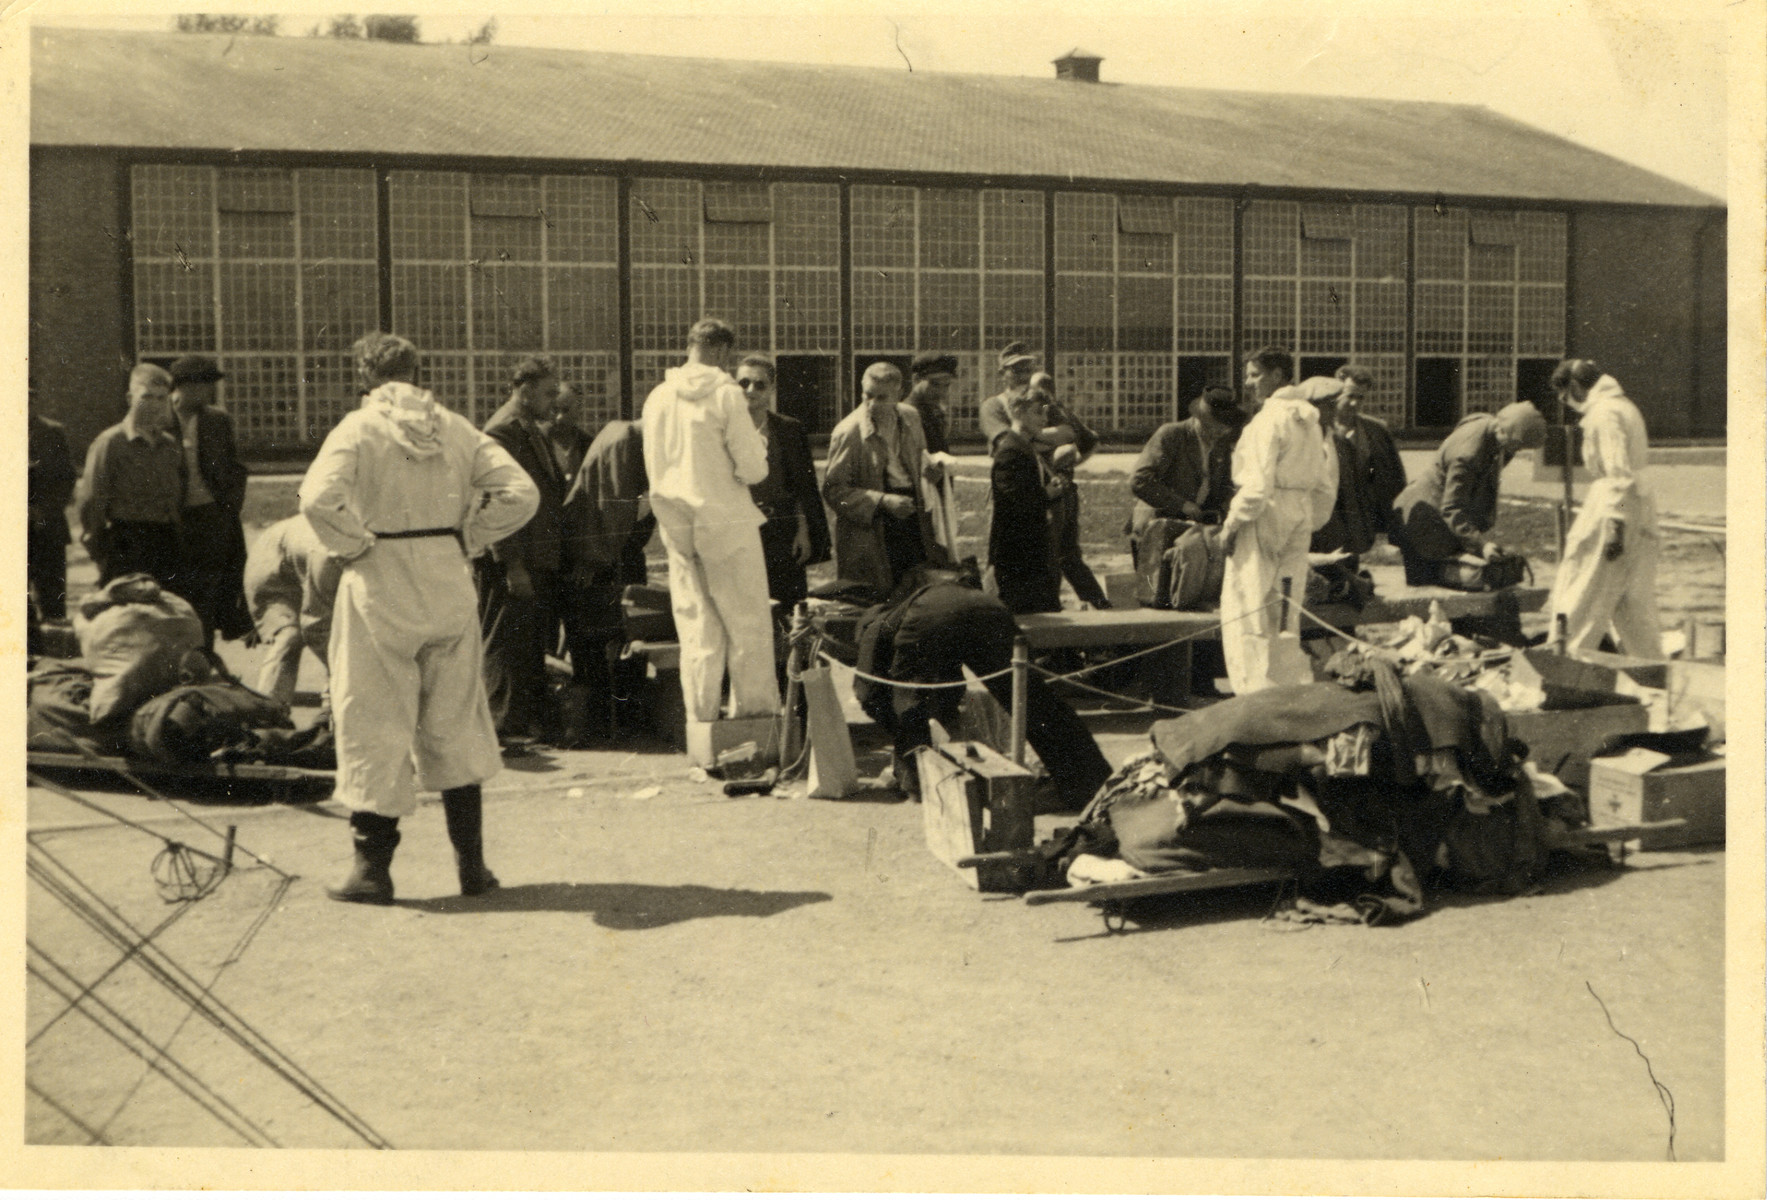 A group of men line up outside a building; they are being attended by five men dressed in white overalls.

On the floor are cardboard boxes, a suitcase, and two stretchers covered with clothes.